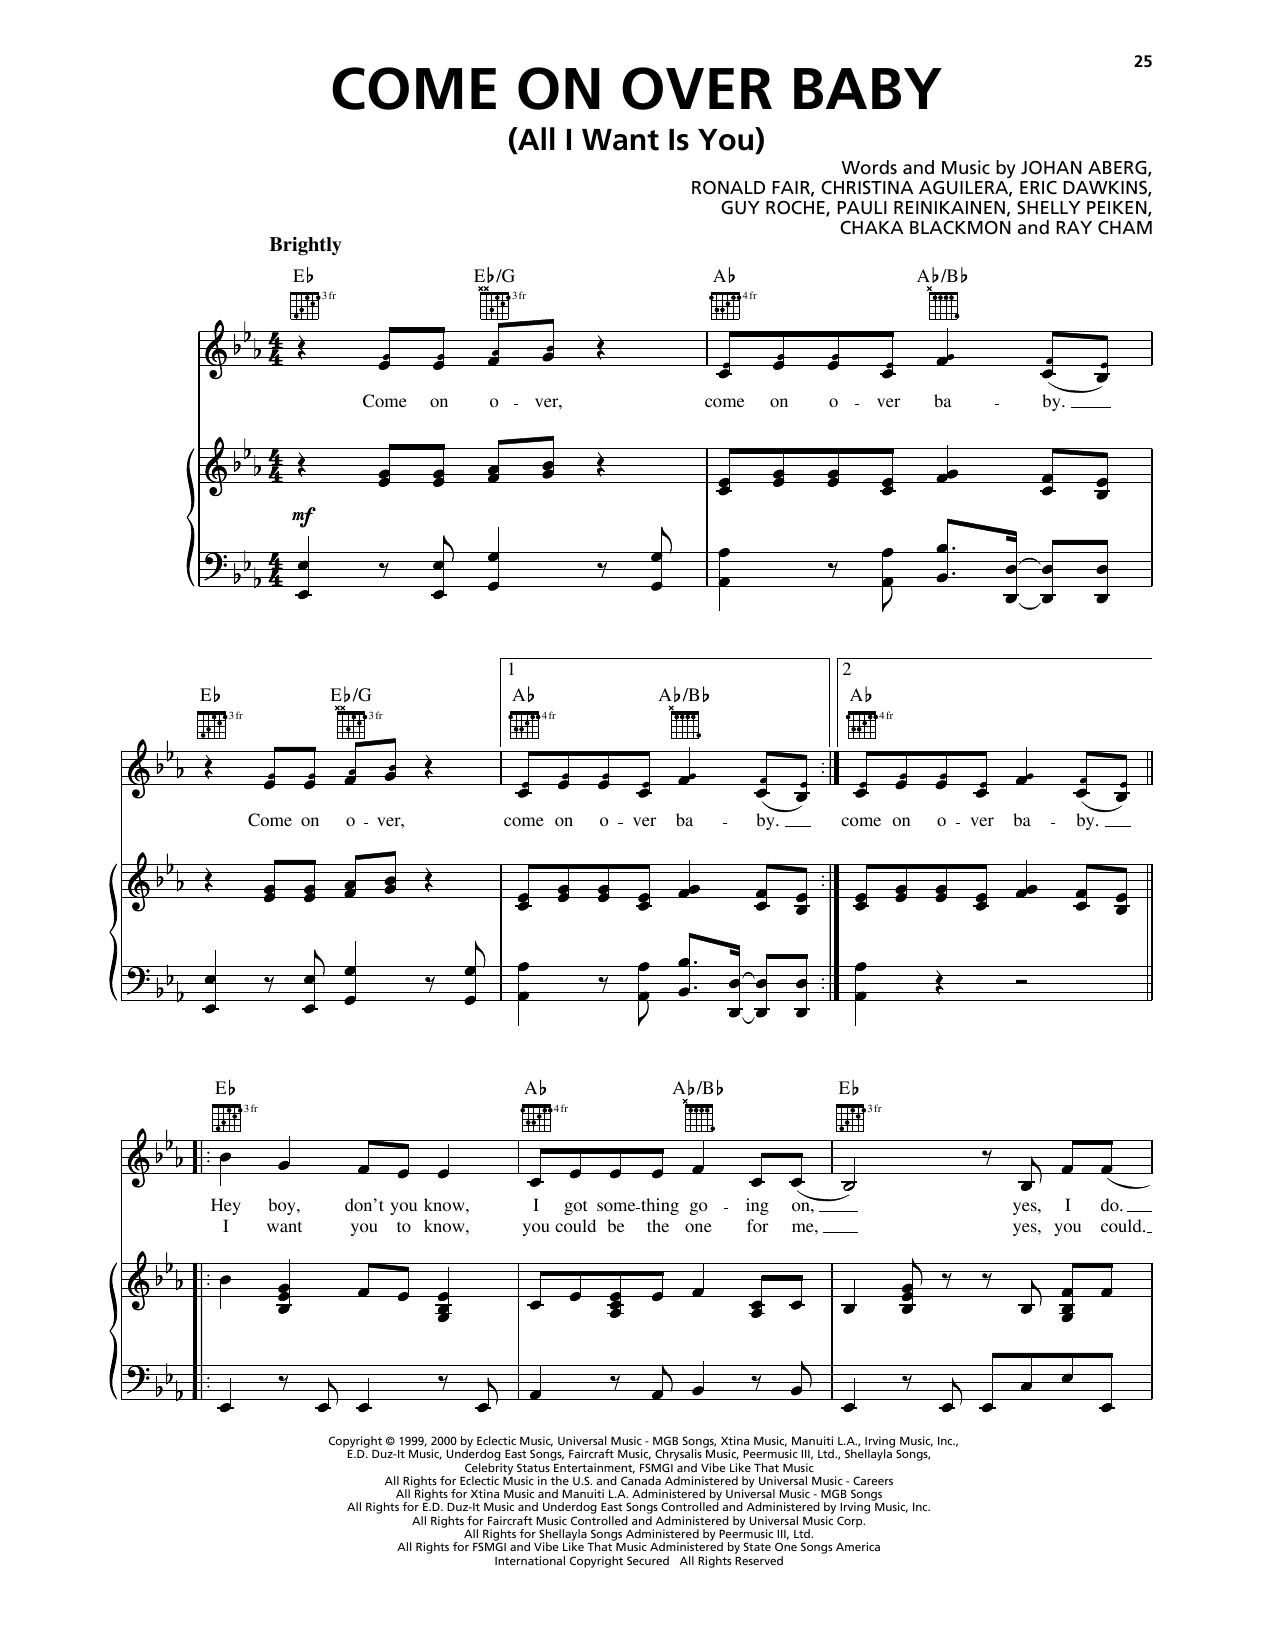 Download Christina Aguilera Come On Over Baby (All I Want Is You) Sheet Music